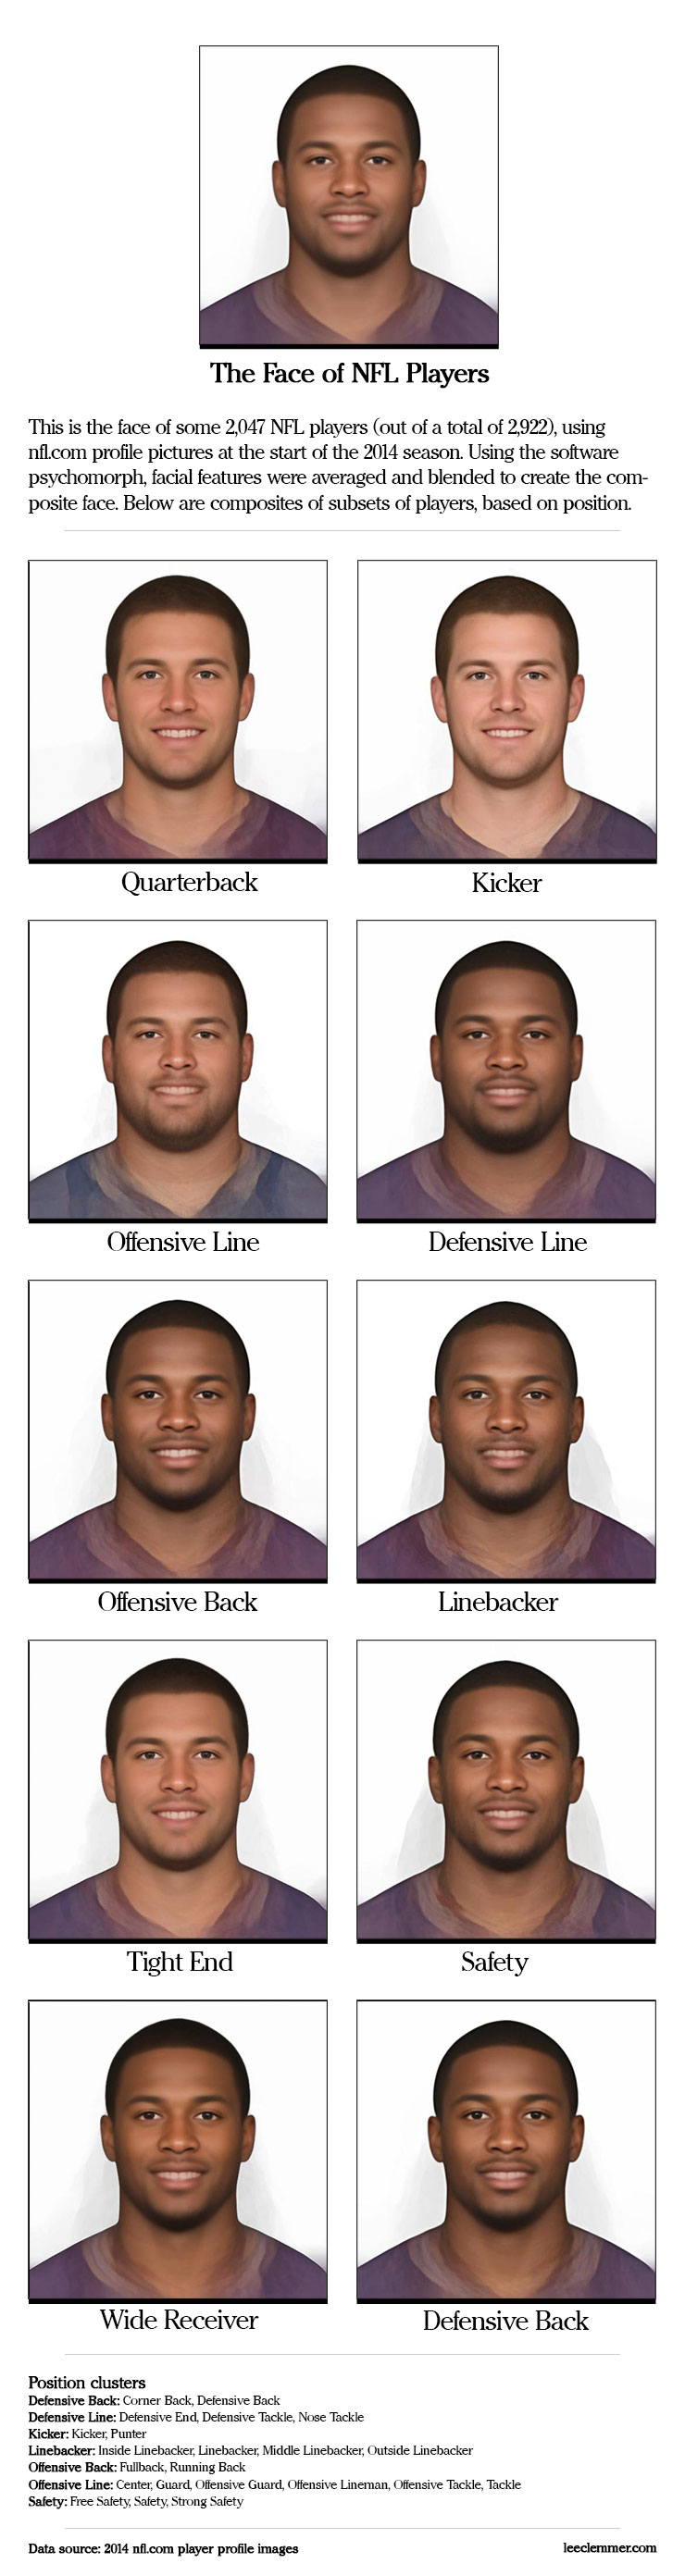 The Face of NFL Players